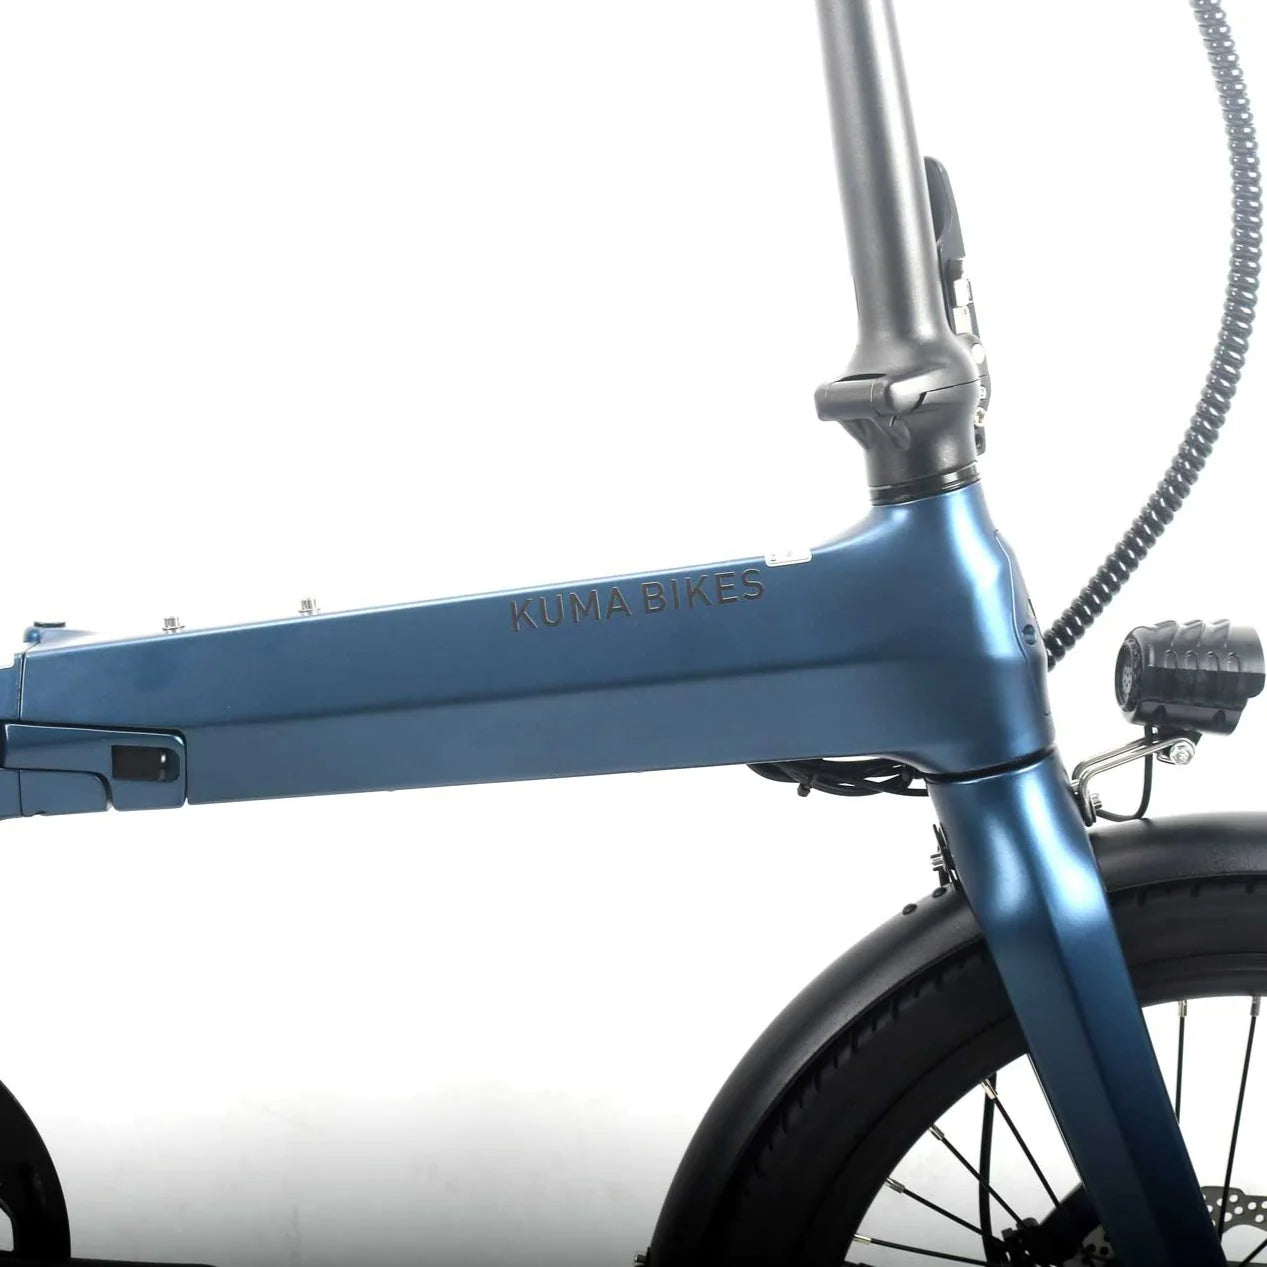 A close up photo of the magnesium frame of the Kuma F1 folding electric bike with its Matt Ocean Blue finish. The Kuma F1 is available to buy from Bleeper.